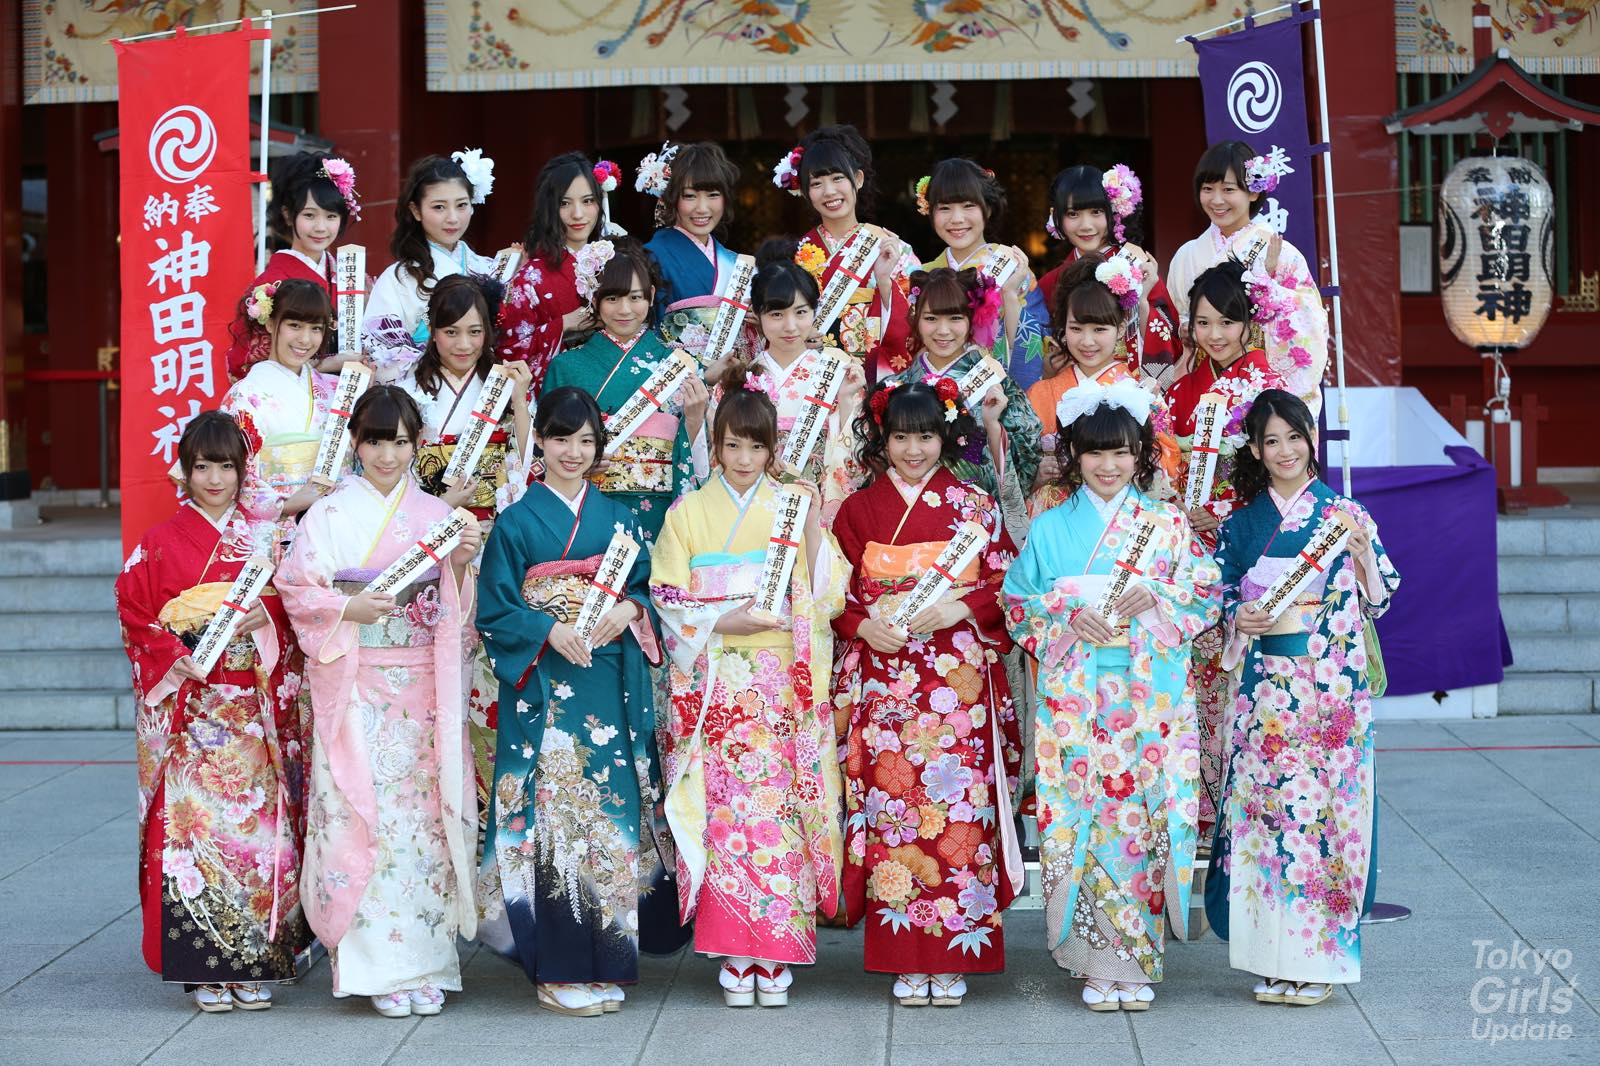 Exclusive Photo Report: AKB48 Coming of Age Ceremony 2015 at Kanda Myojin